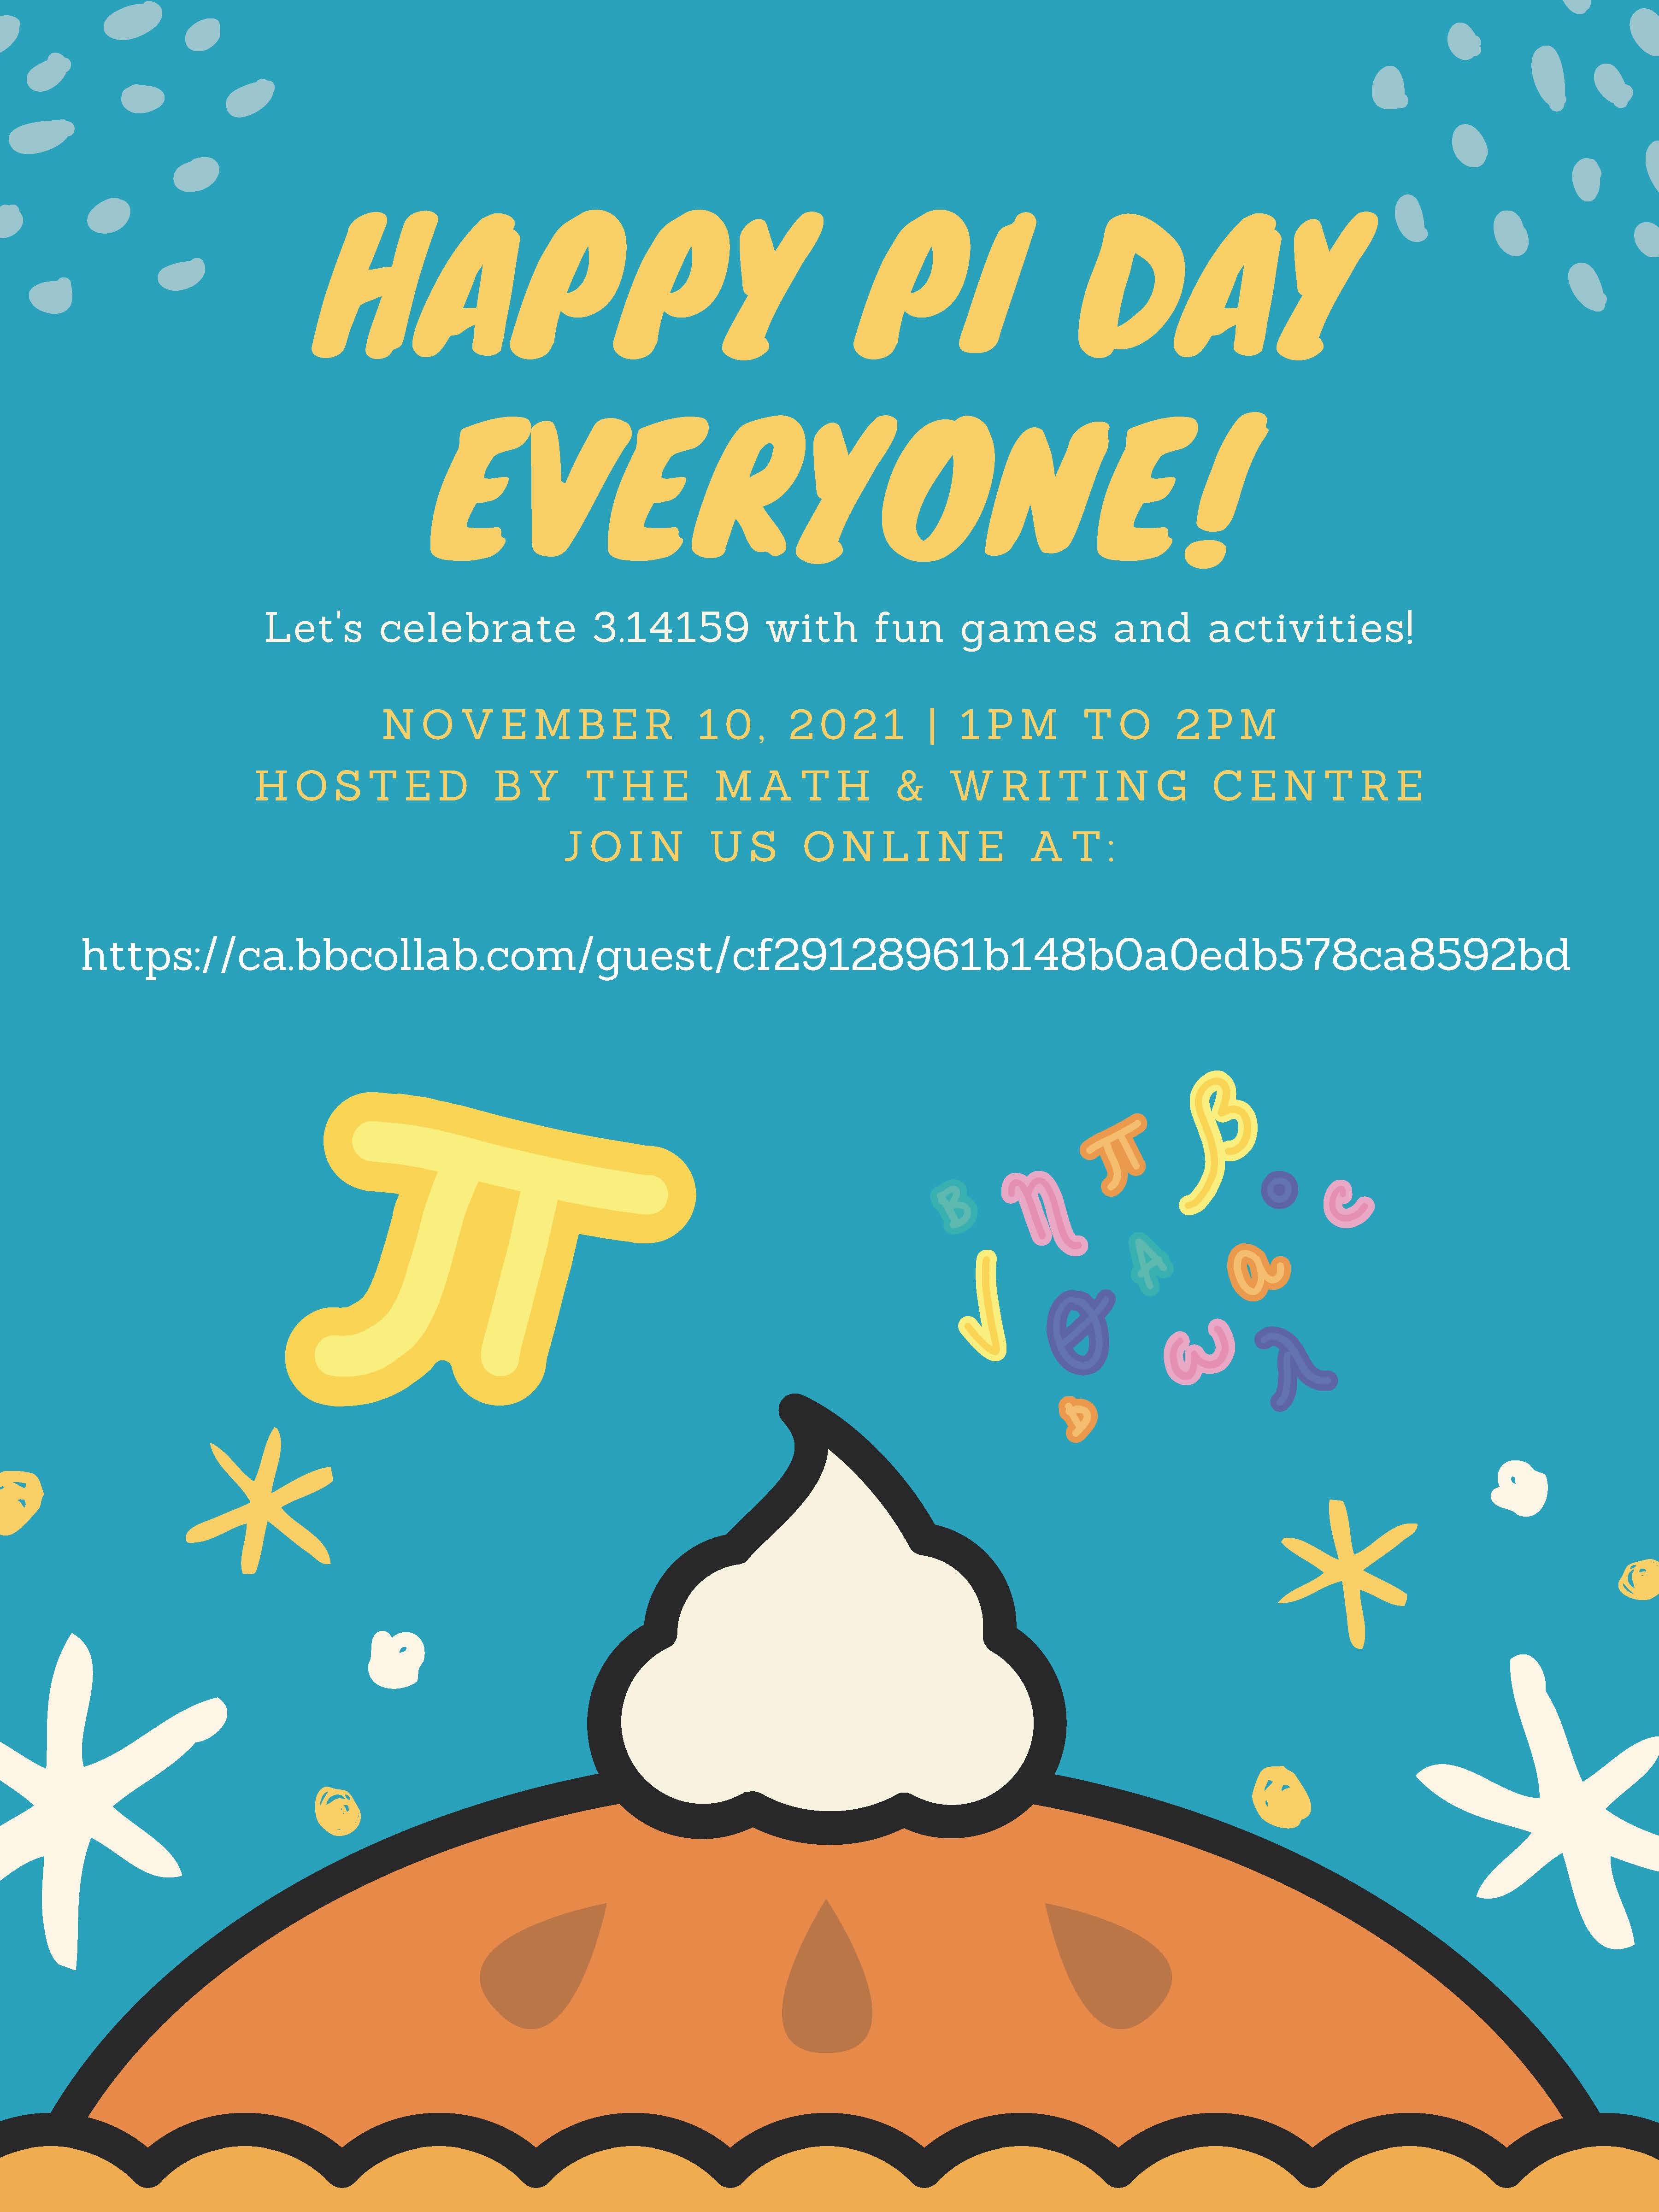 Happy Pi Day Everyone Let’s celebrate 314159 with fun games and activities! November 10, 2021  1pm to 2pm Hosted by the Math & Writing Centre Join us online at:  https://ca.bbcollab.com/collab/ui/session/guest/cf29128961b148b0a0edb578ca8592bd